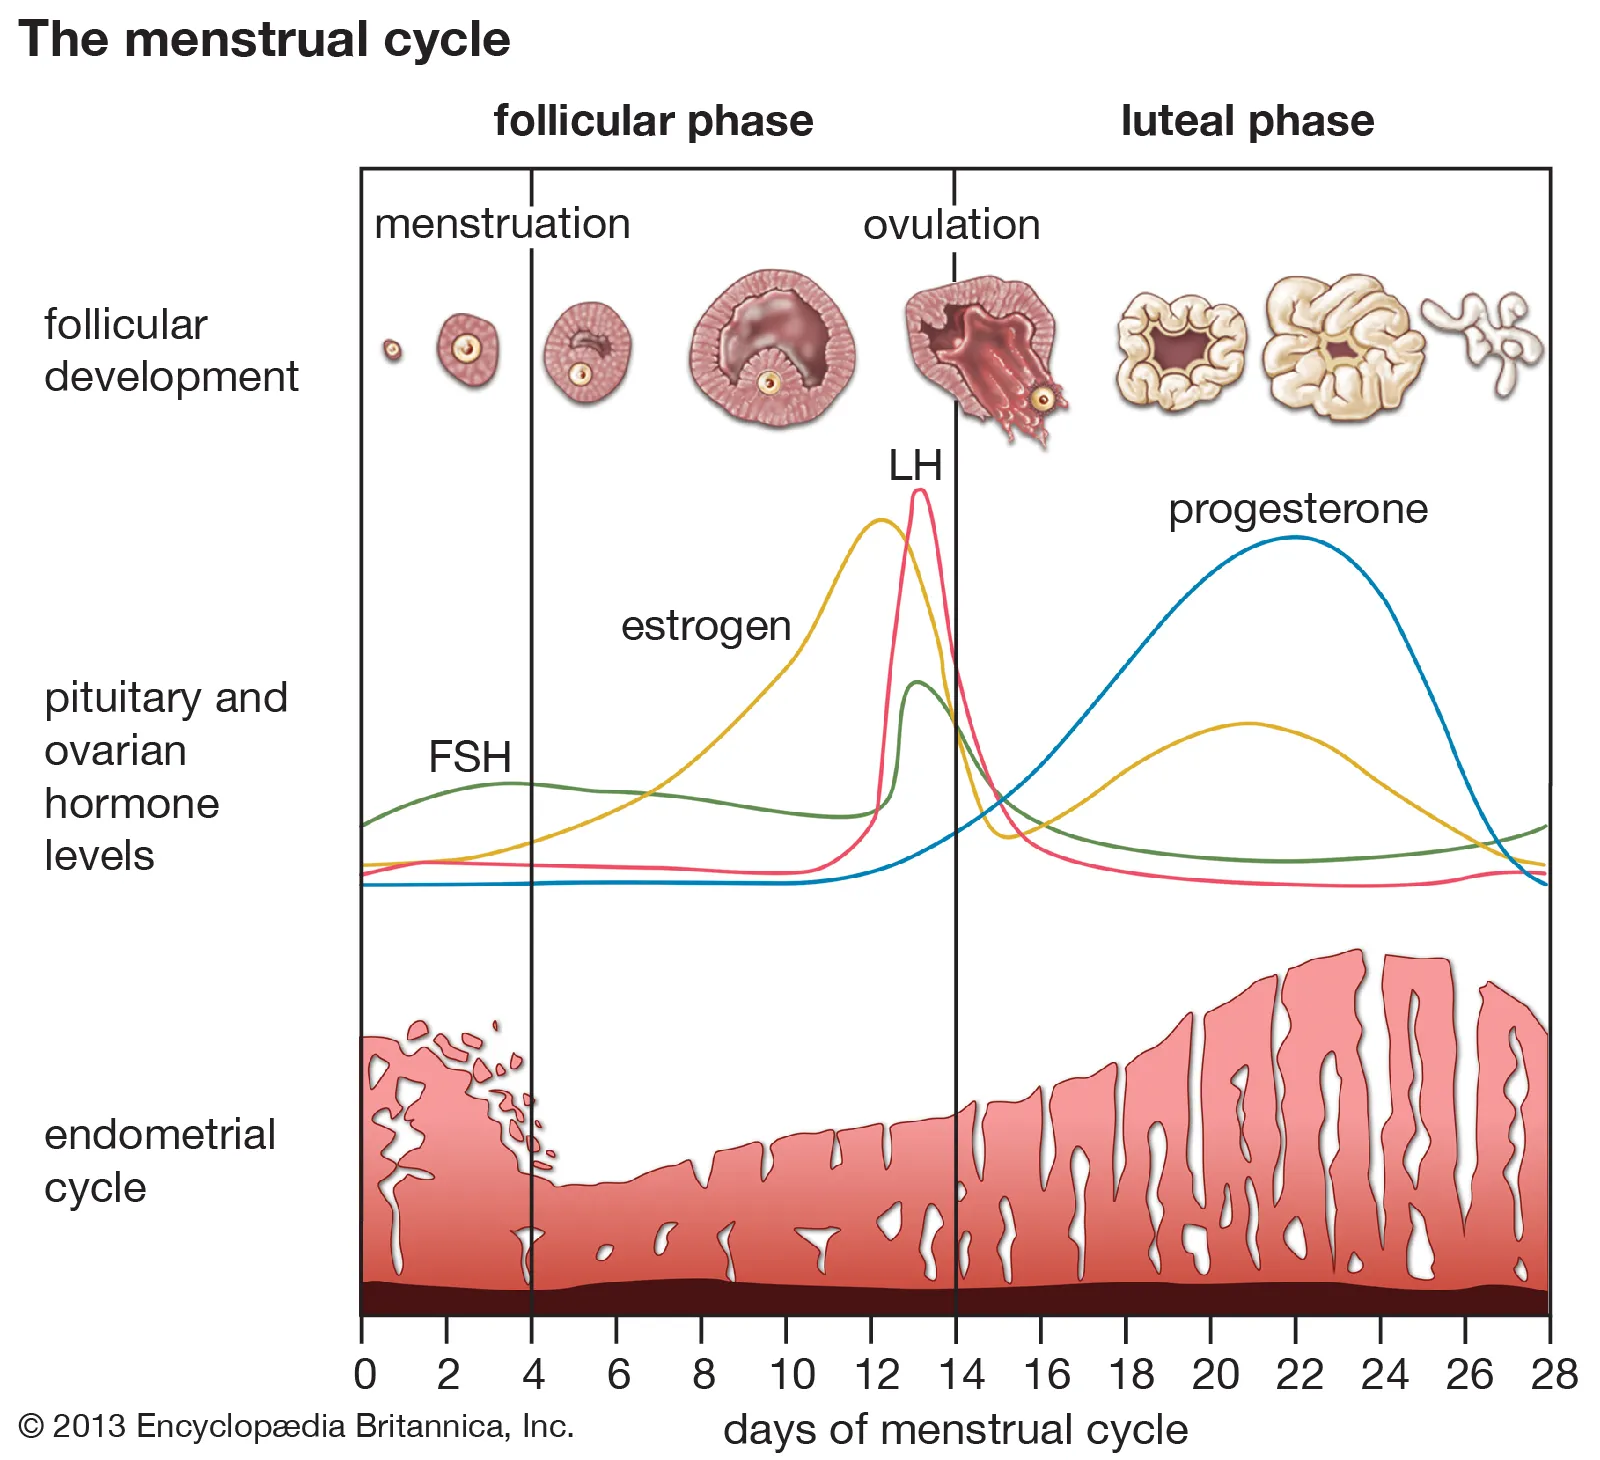 Infographic of the menstrual cycle showing the different phases the ovaries and uterus go through, as well as hormone level fluctuations